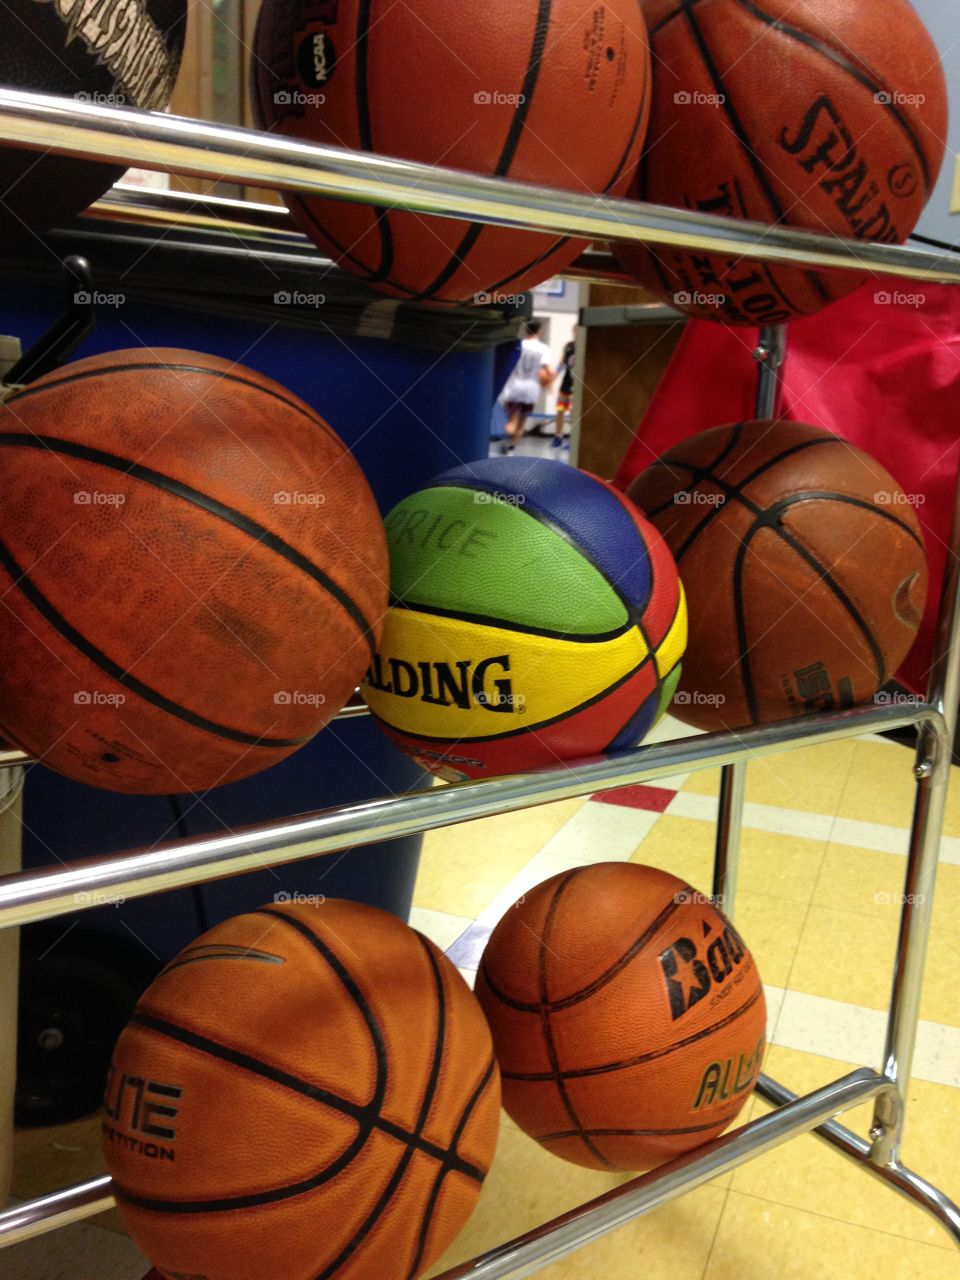 Basketballs on a rack. People visible behind in the distance playing basketball.